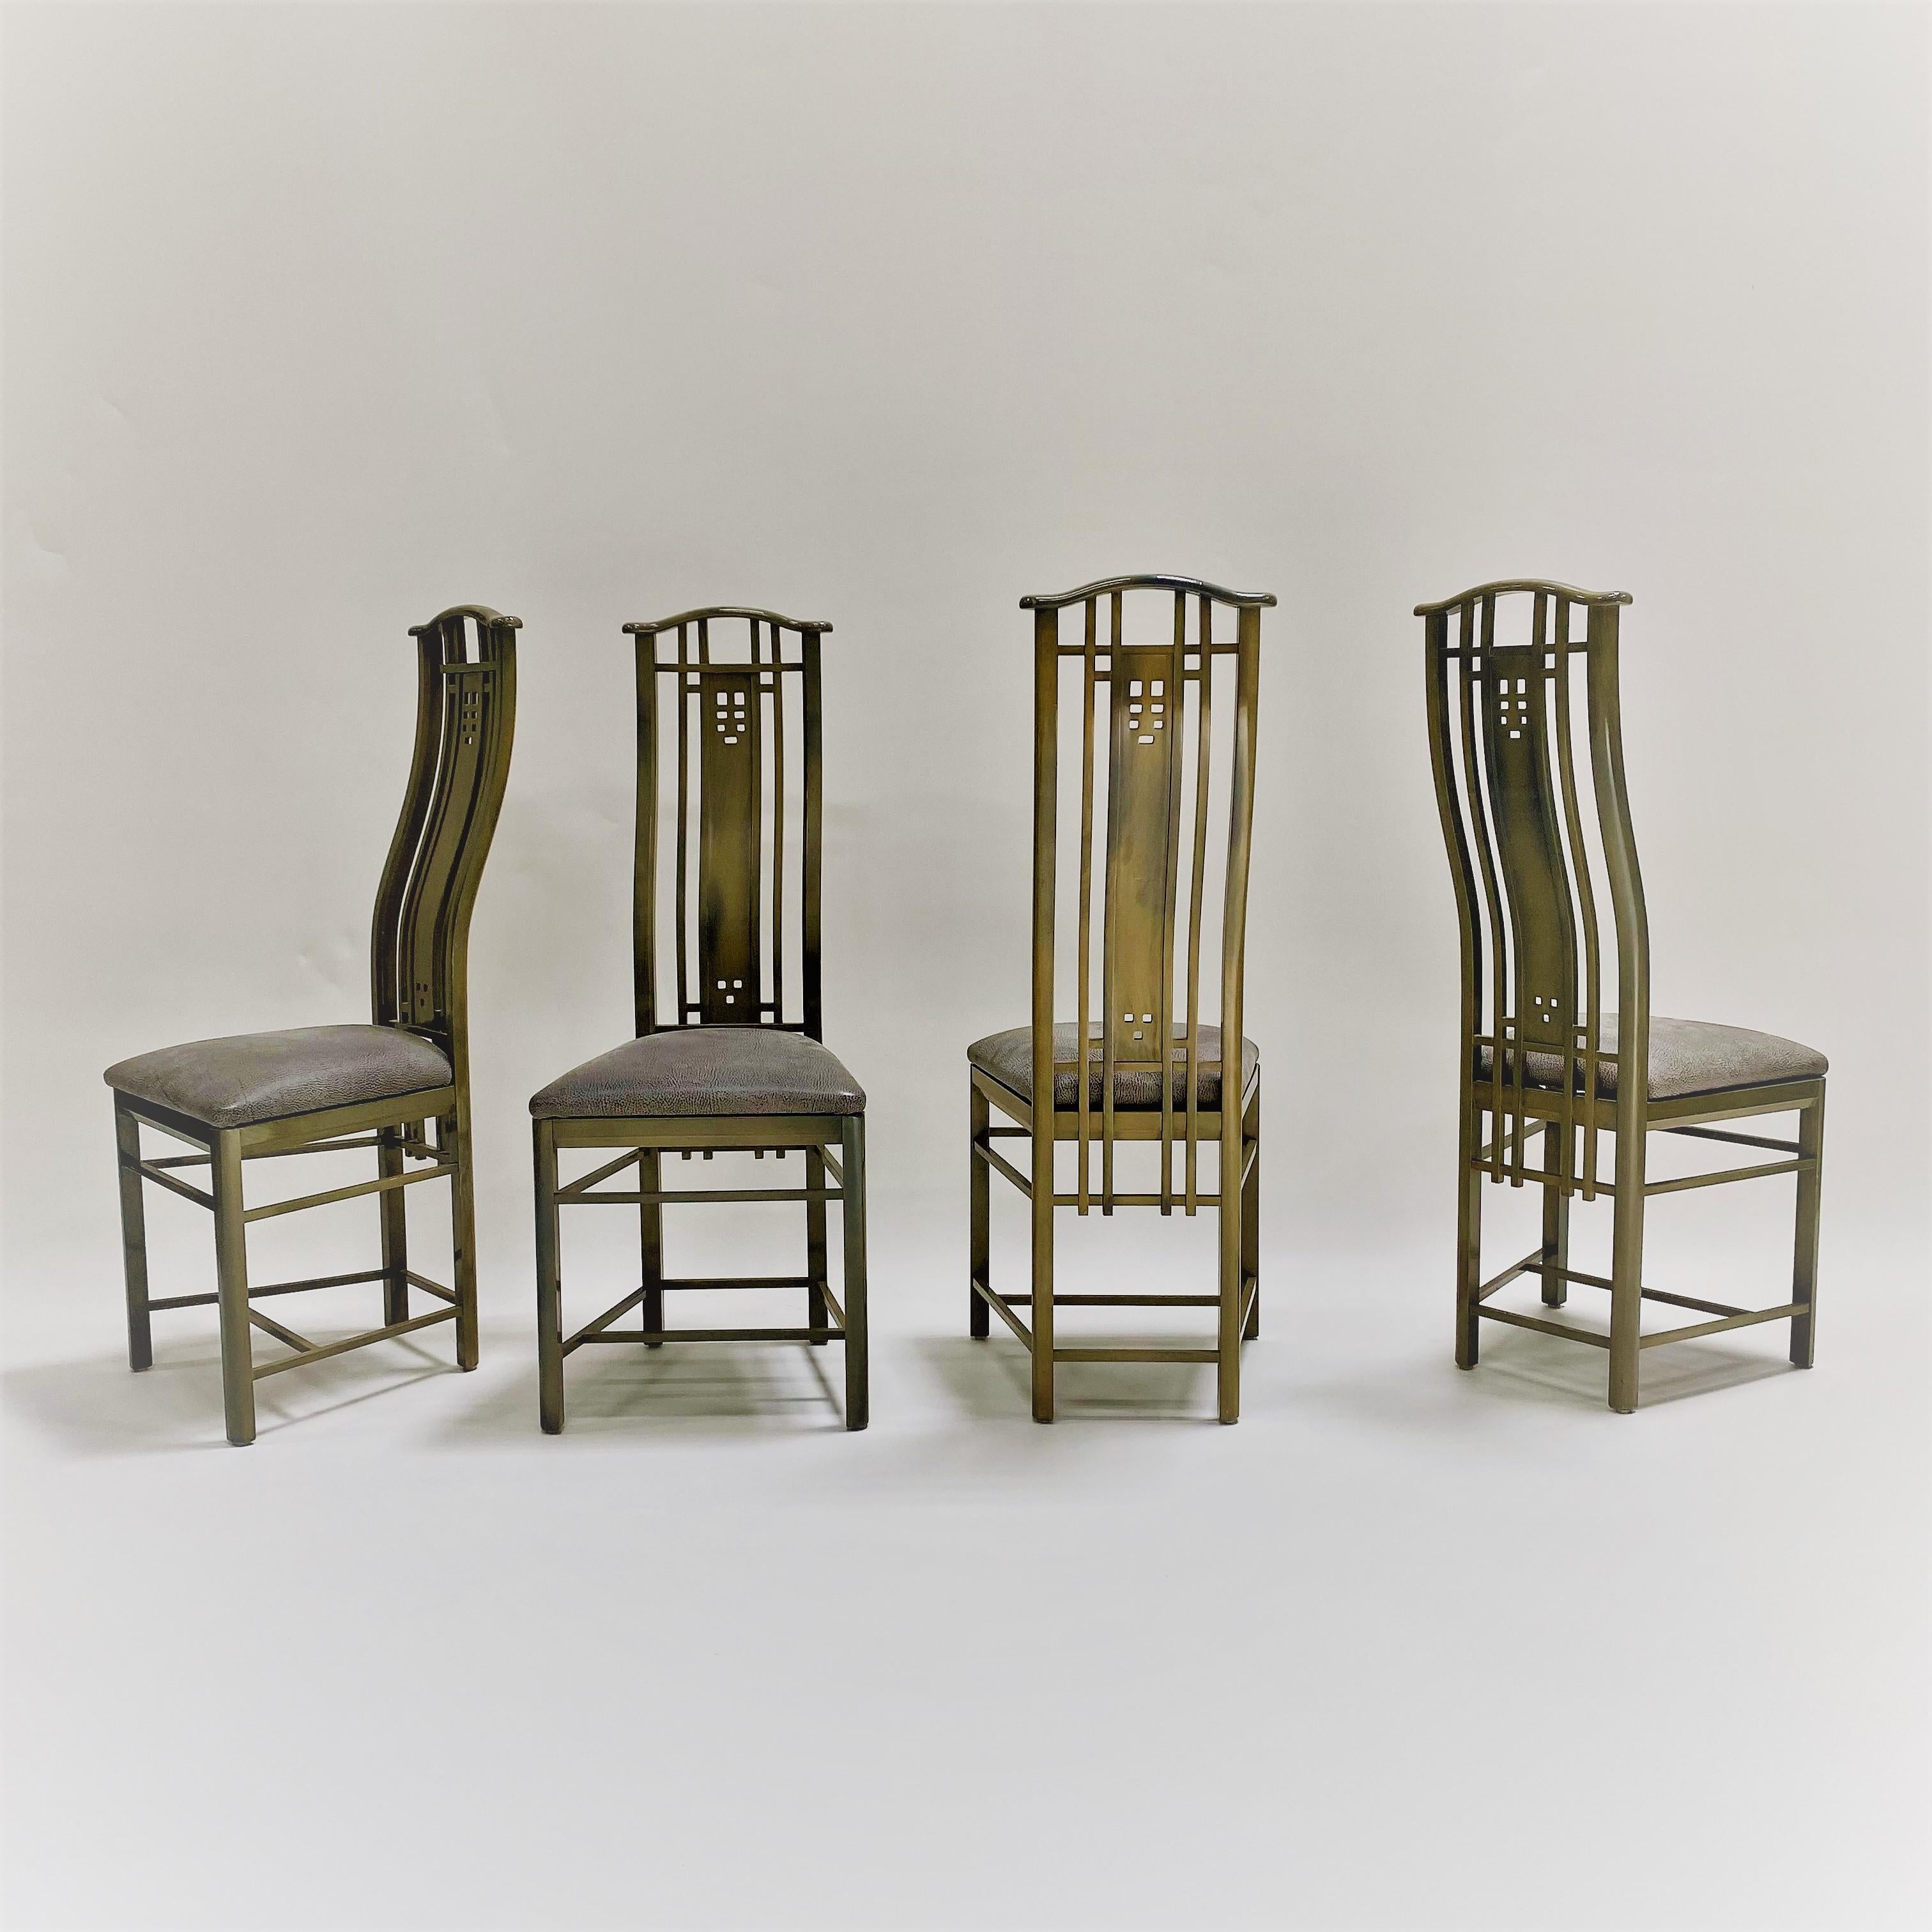 Set of 4 High Back Lacquered Dining Chairs by Umberto Asnago for Giorgetti, 1980 For Sale 6